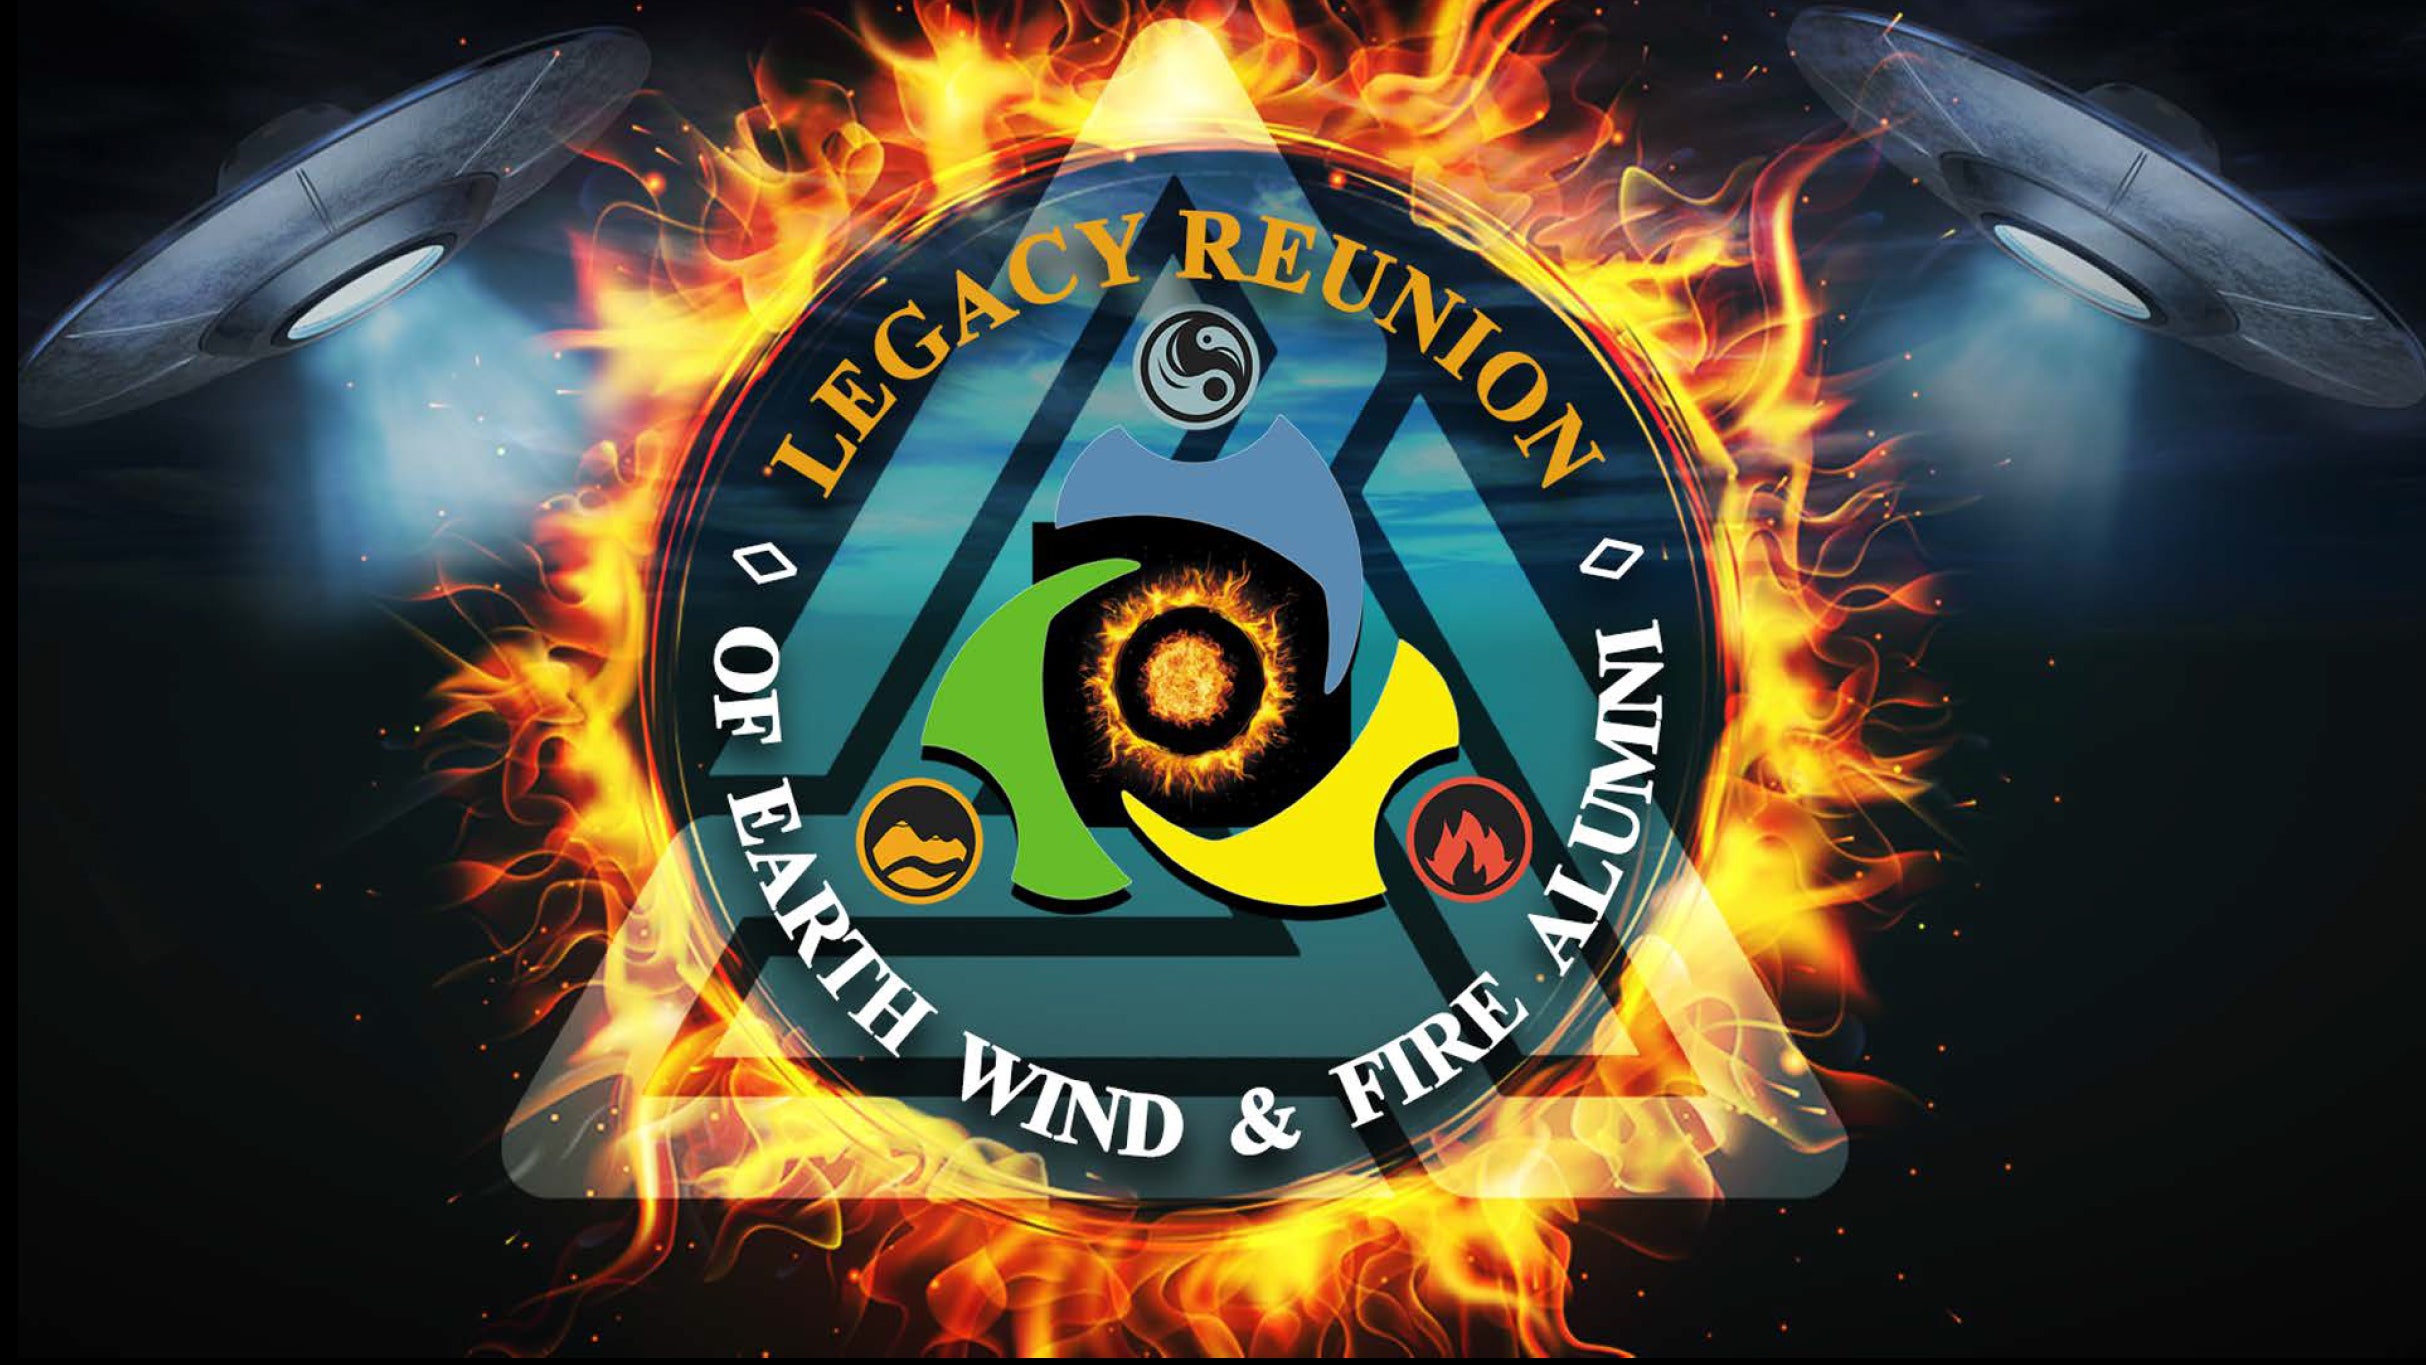 Legacy Reunion: Earth, Wind and Fire Alumni free presale password for early tickets in Reading